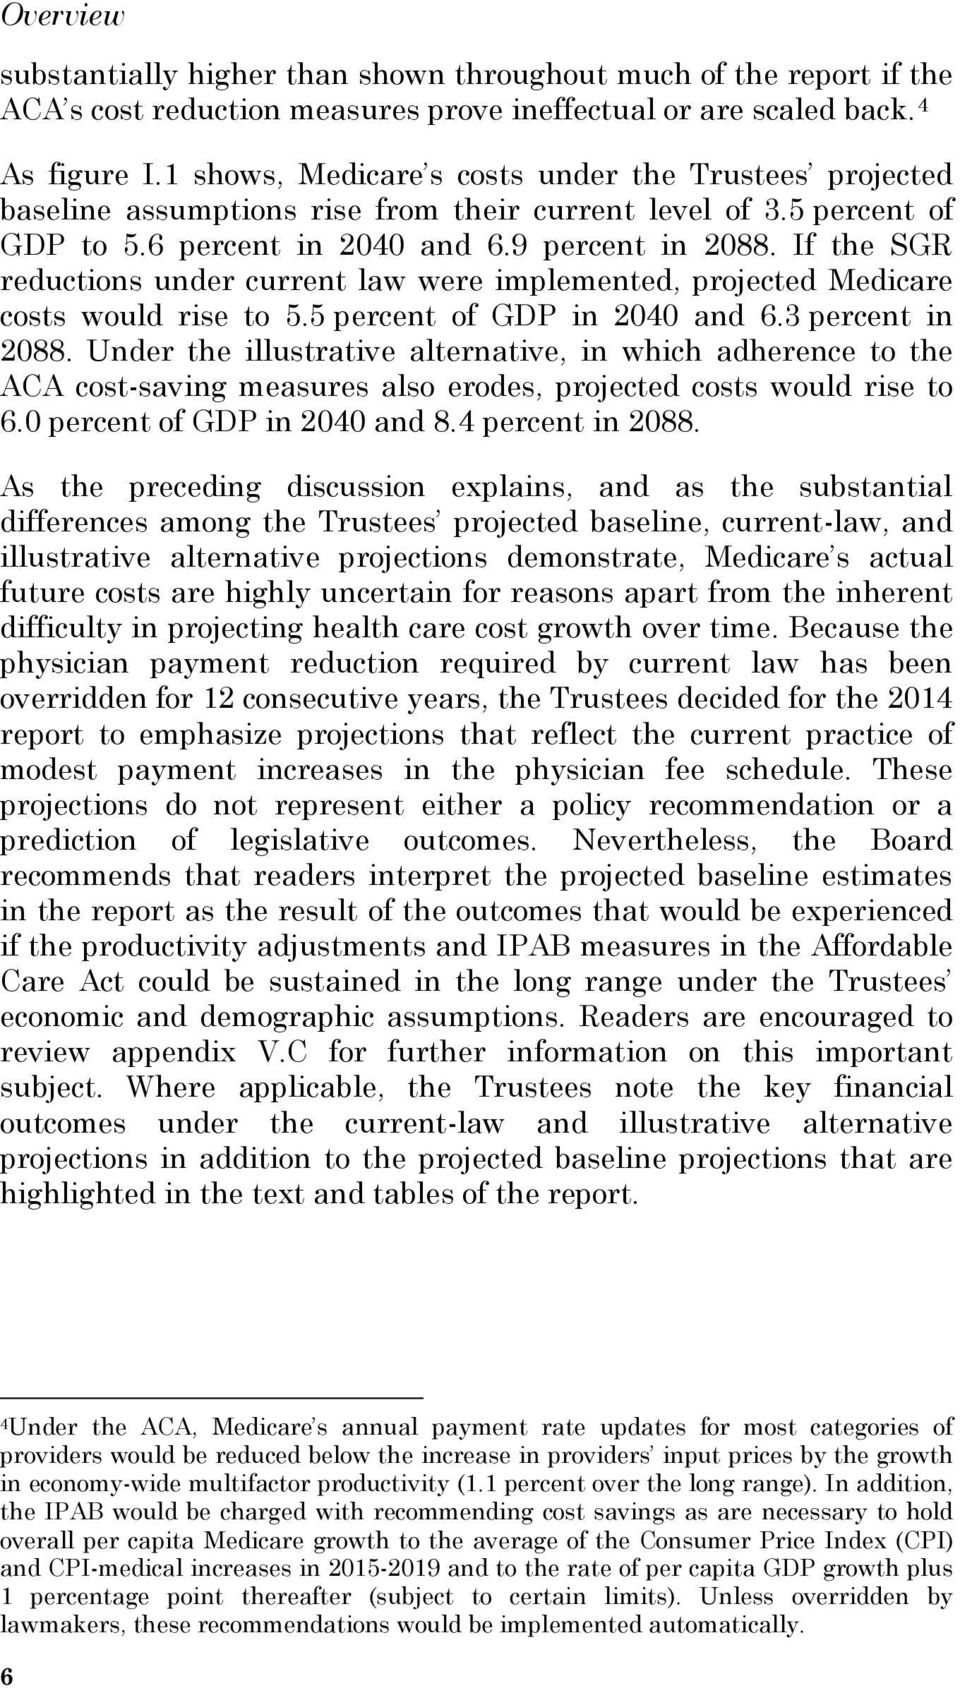 If the SGR reductions under current law were implemented, projected Medicare costs would rise to 5.5 percent of GDP in 2040 and 6.3 percent in 2088.